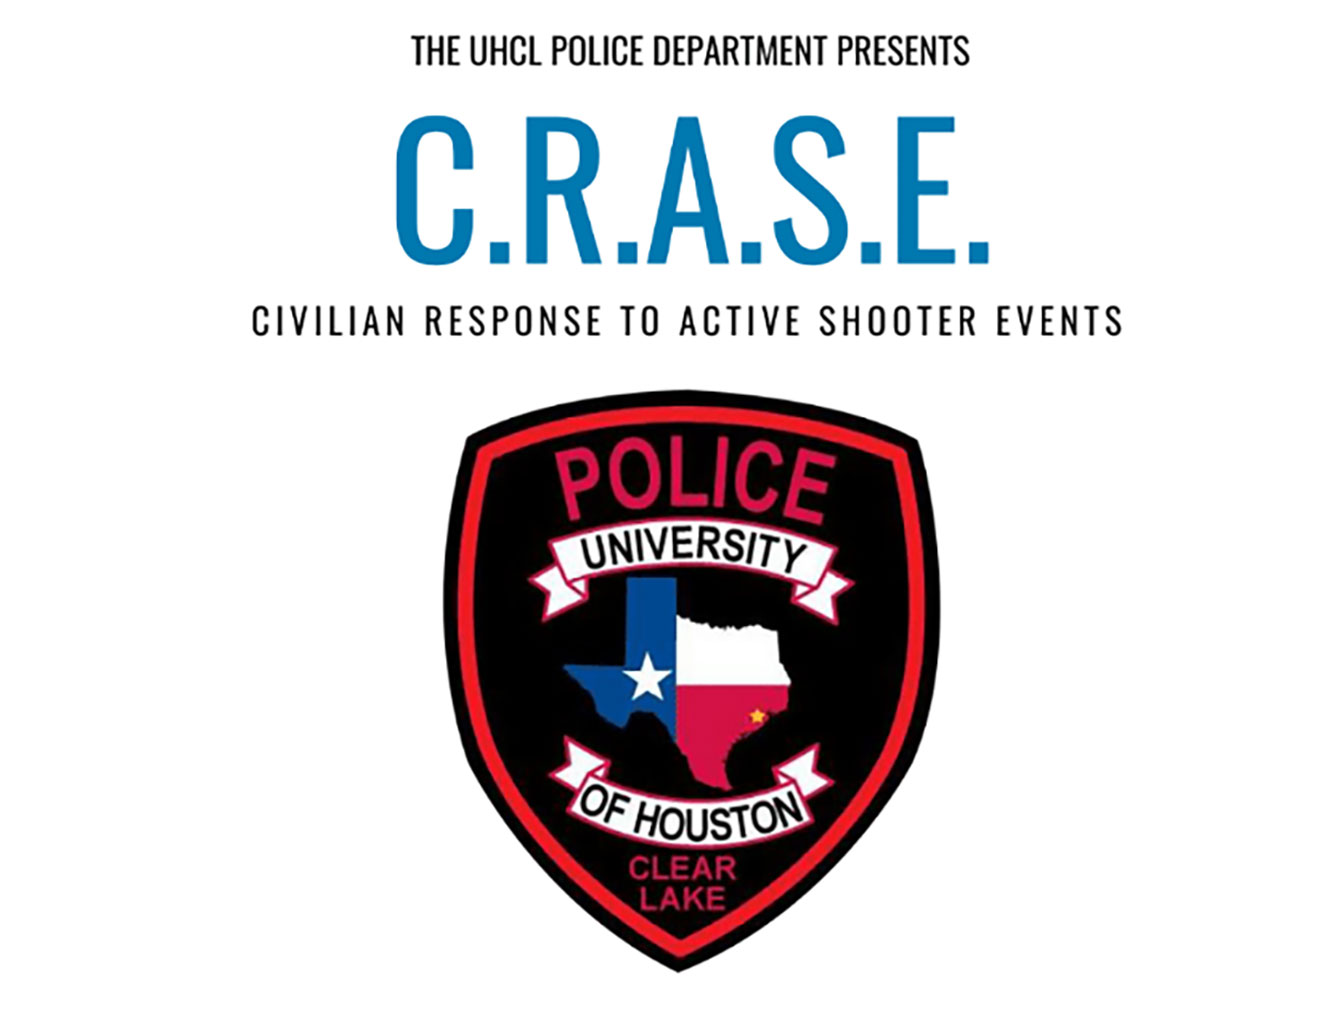 GRAPHIC: Flyer for UHCL's C.R.A.S.E course. The course is intended to prepare students for an active shooter situation. Flyer depicts UHCL Police Department logo with the acronym C.R.A.S.E. above it. Image courtesy of UHCL Police Department.